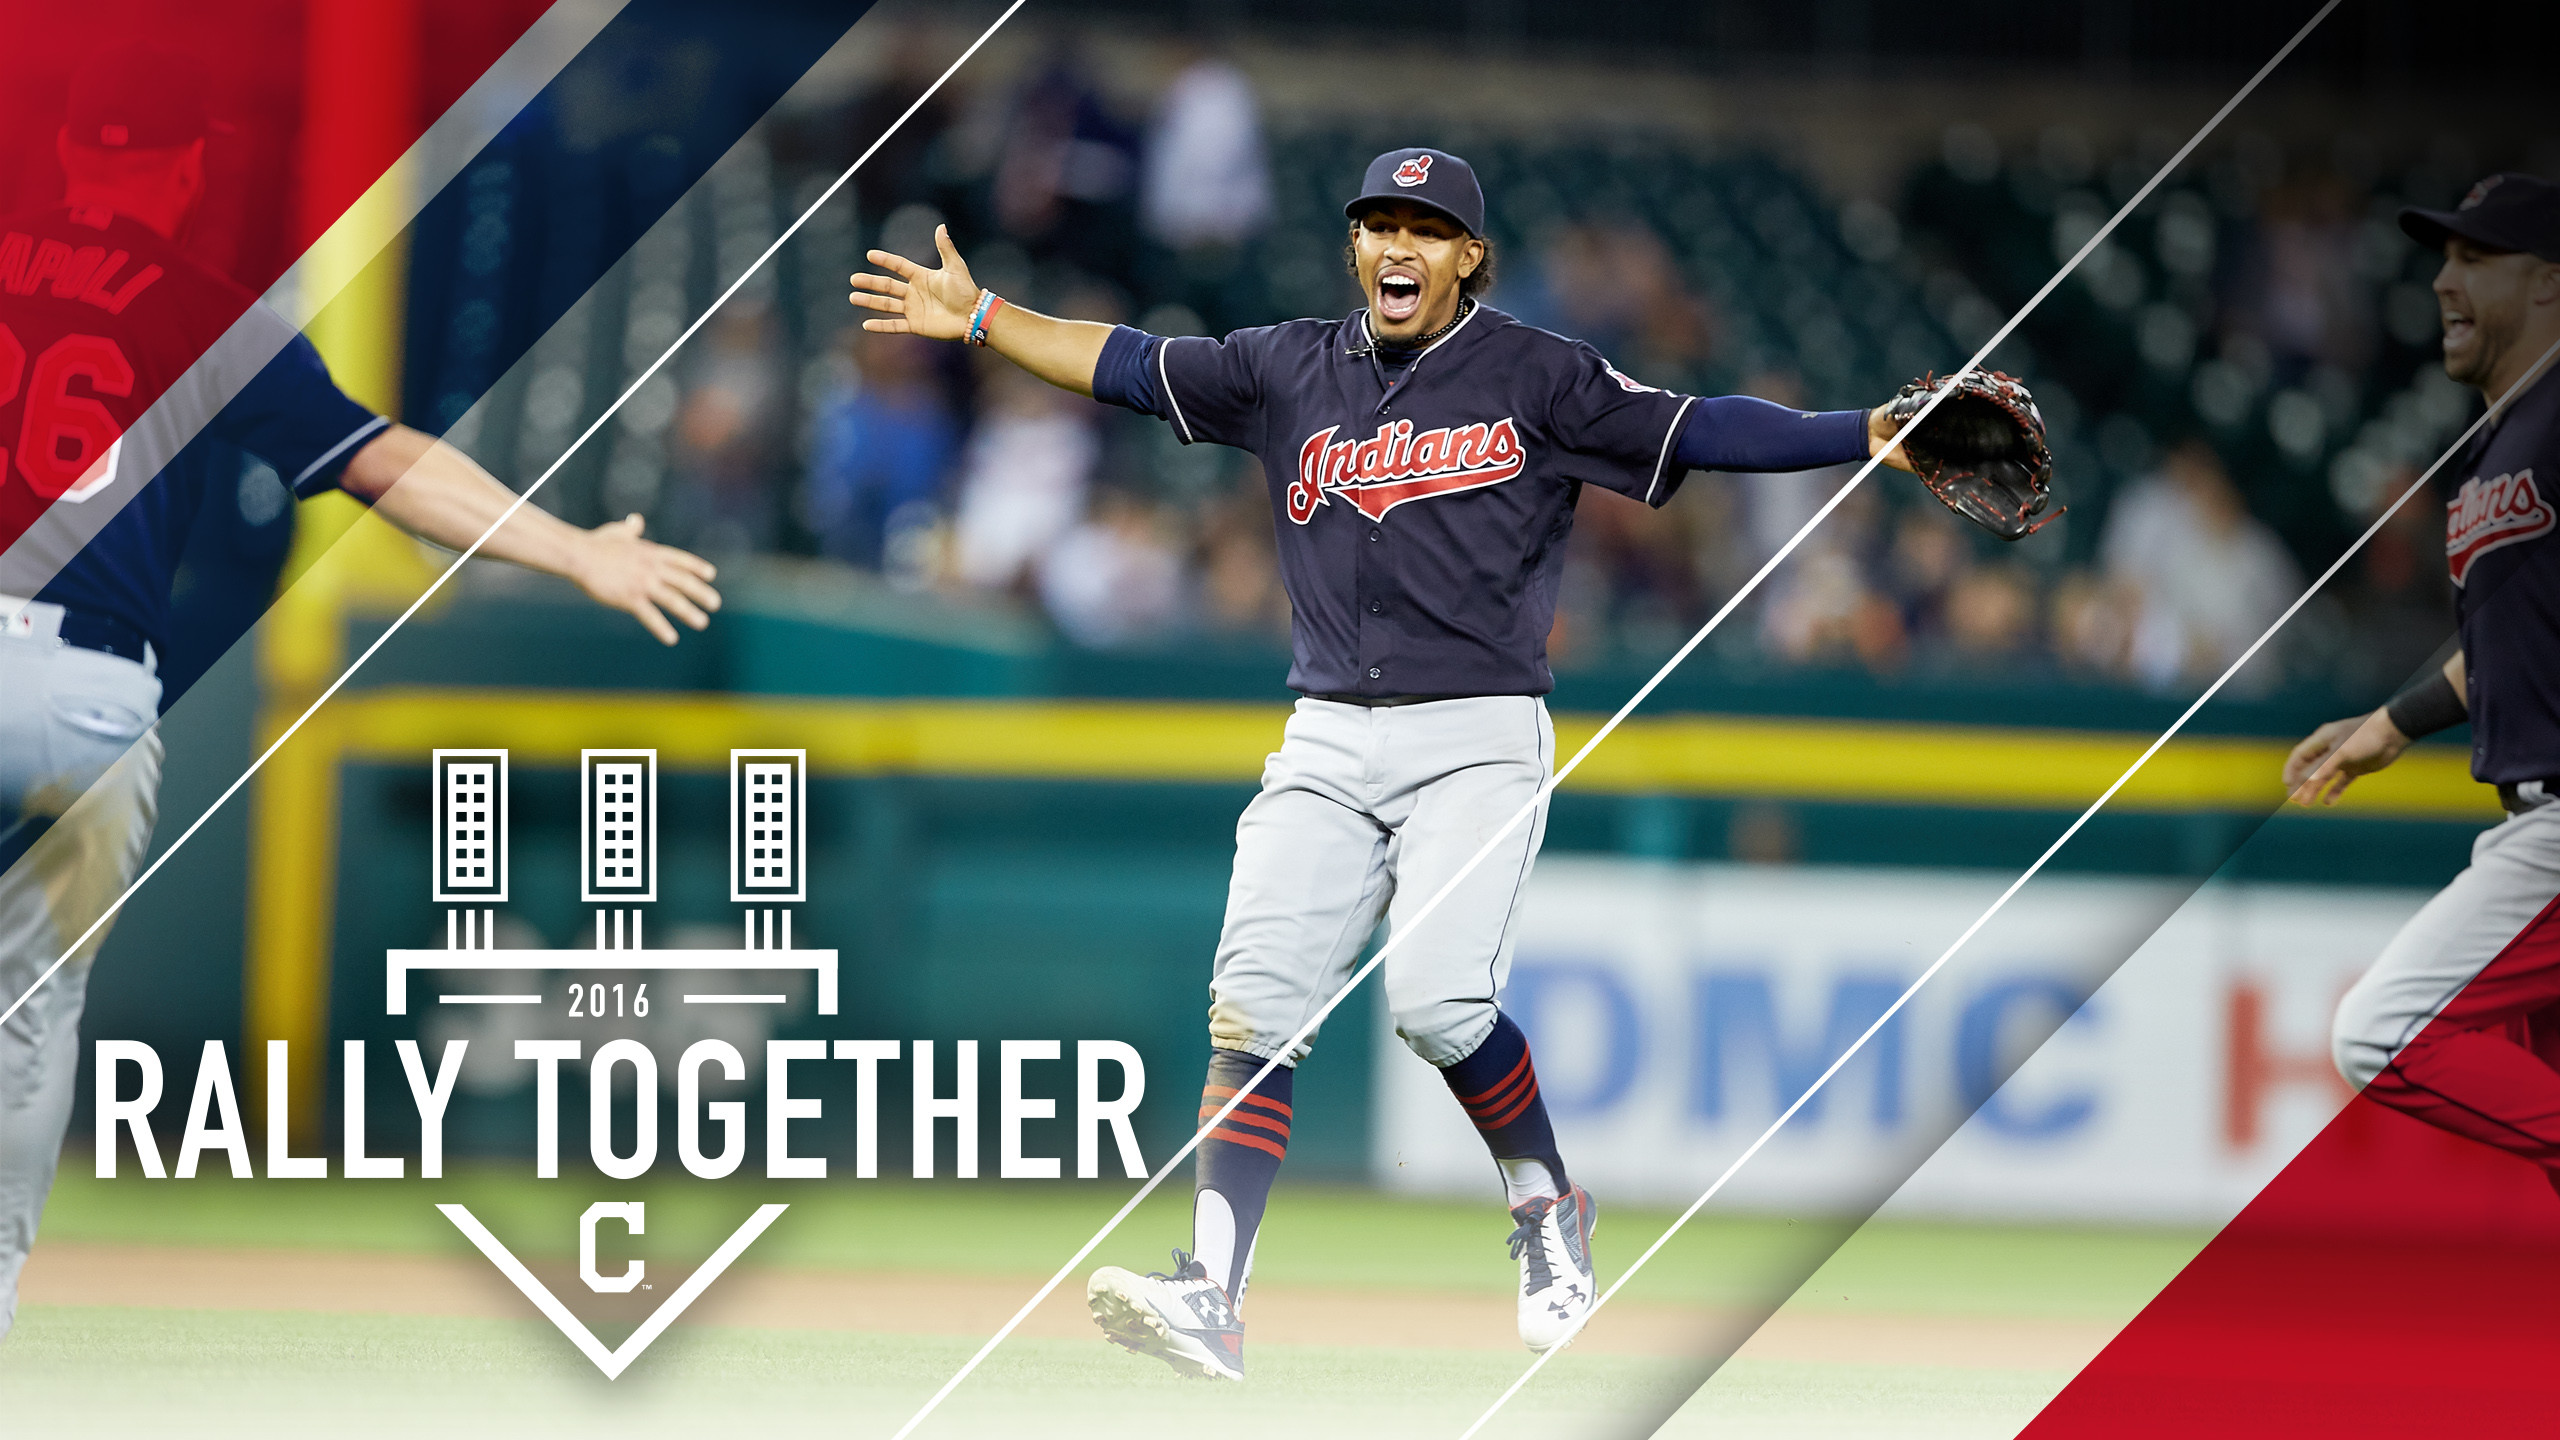 wallpaper.wiki-Download-Free-Cleveland-Indians-Wallpaper-PIC-